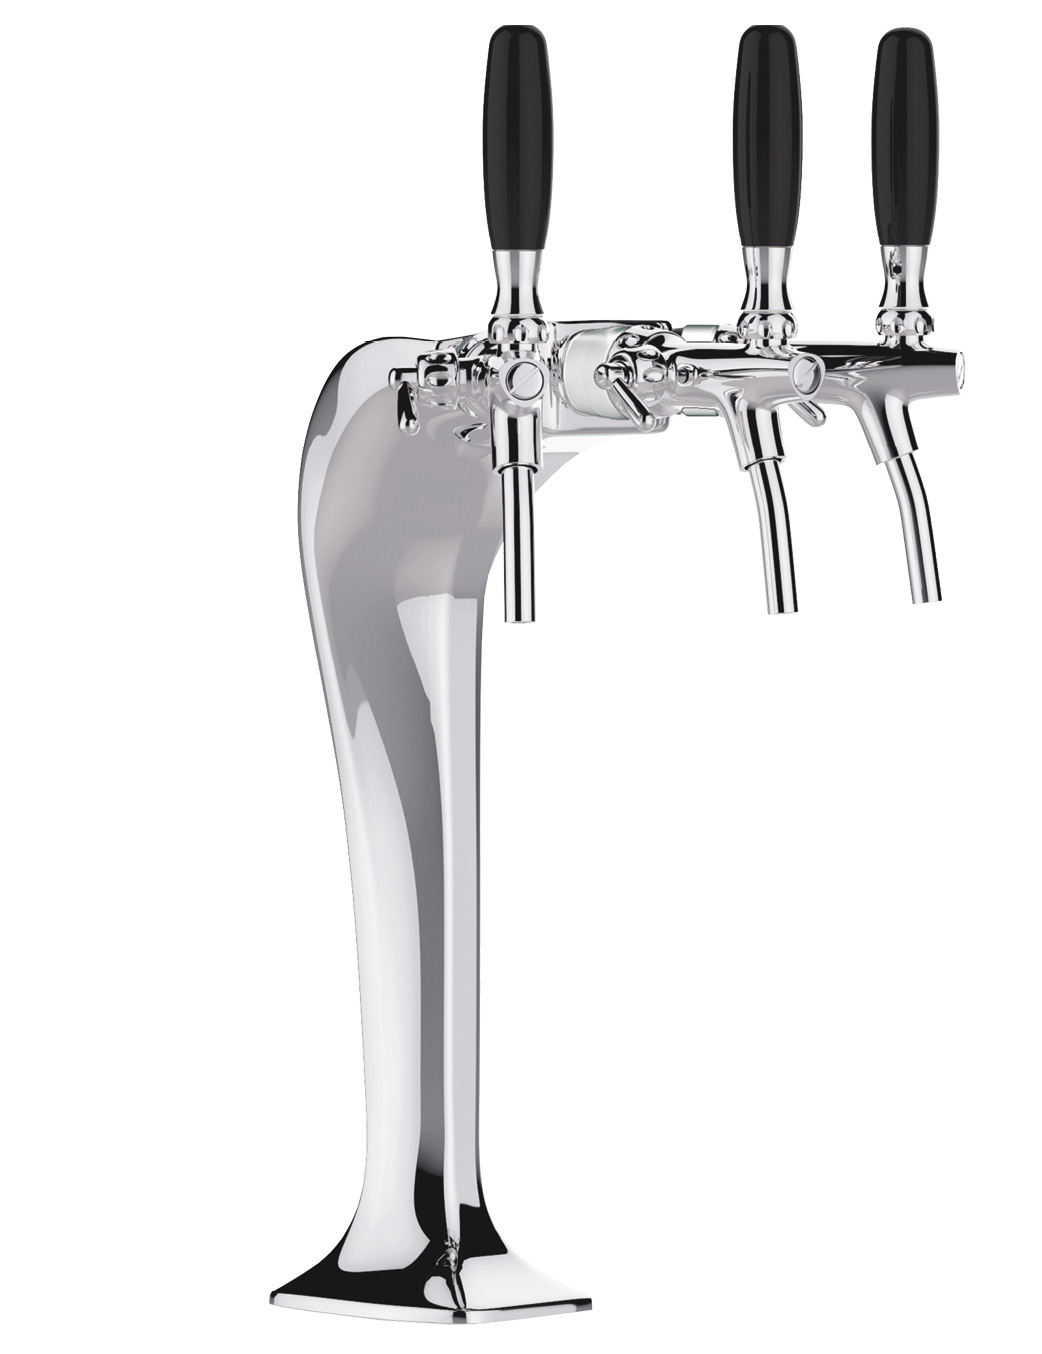 Cobra 3 way tap for still sparkling and ambient water